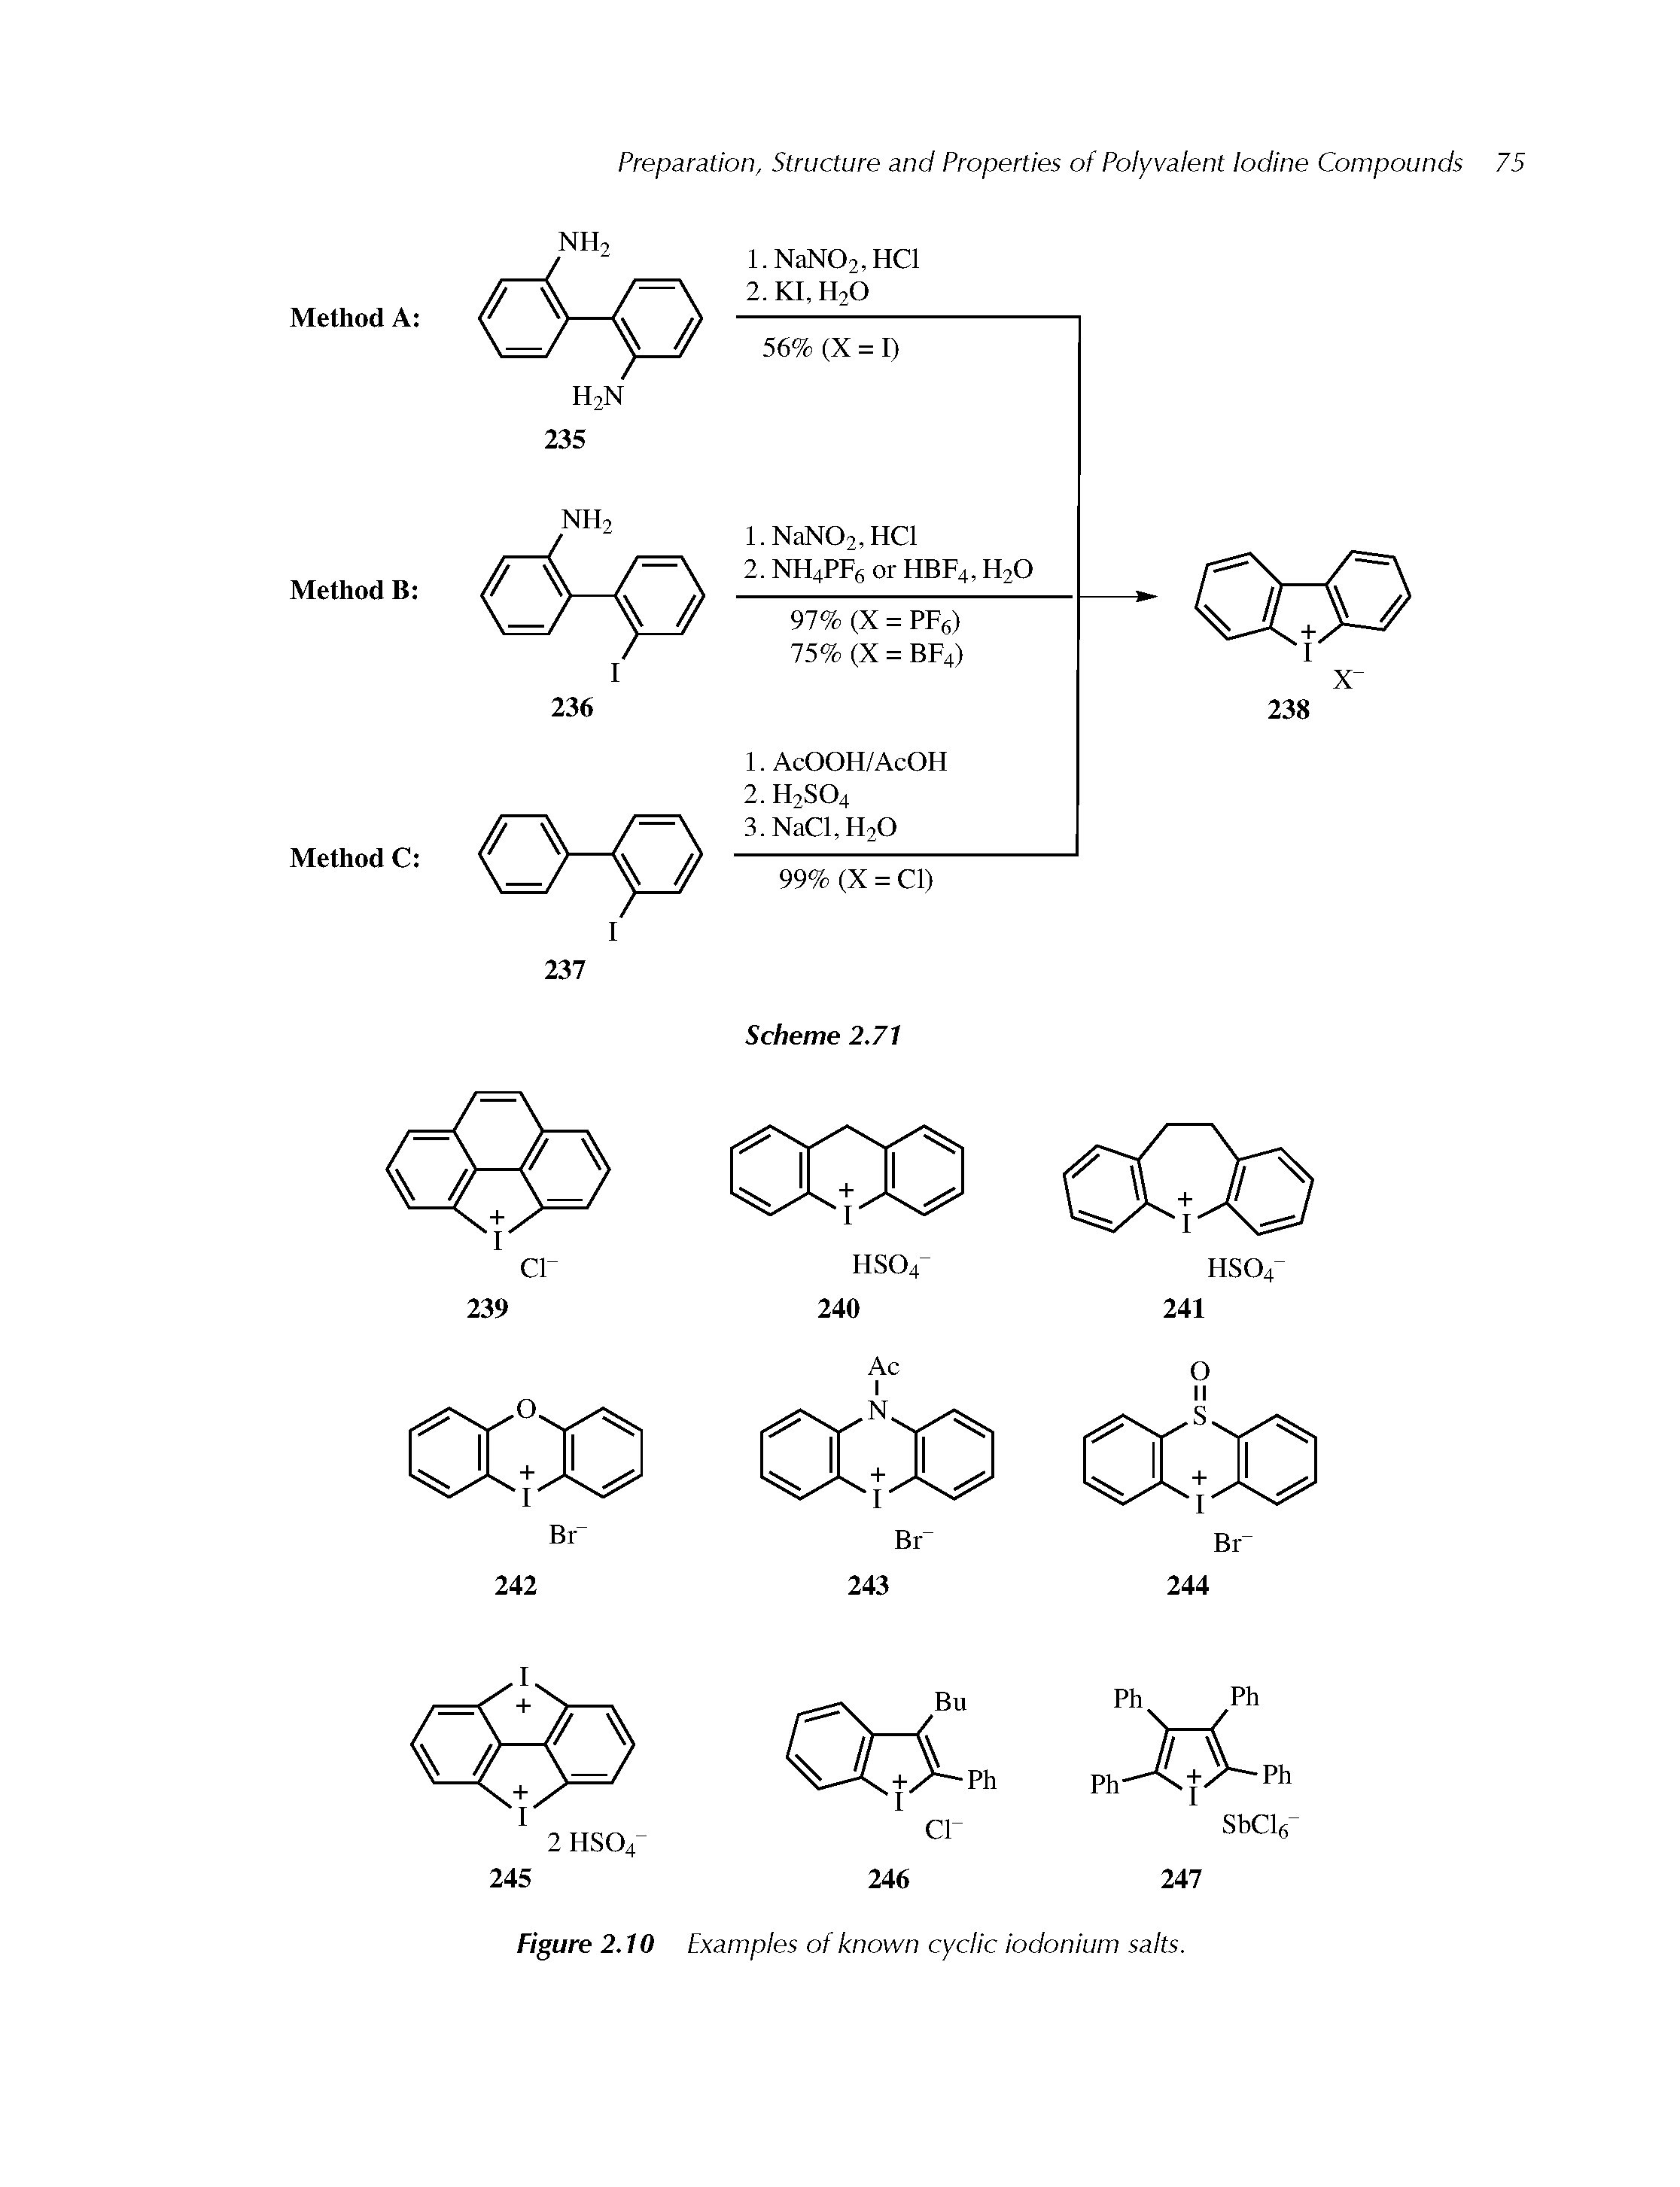 Figure 2.10 Examples of known cyclic iodonium salts.